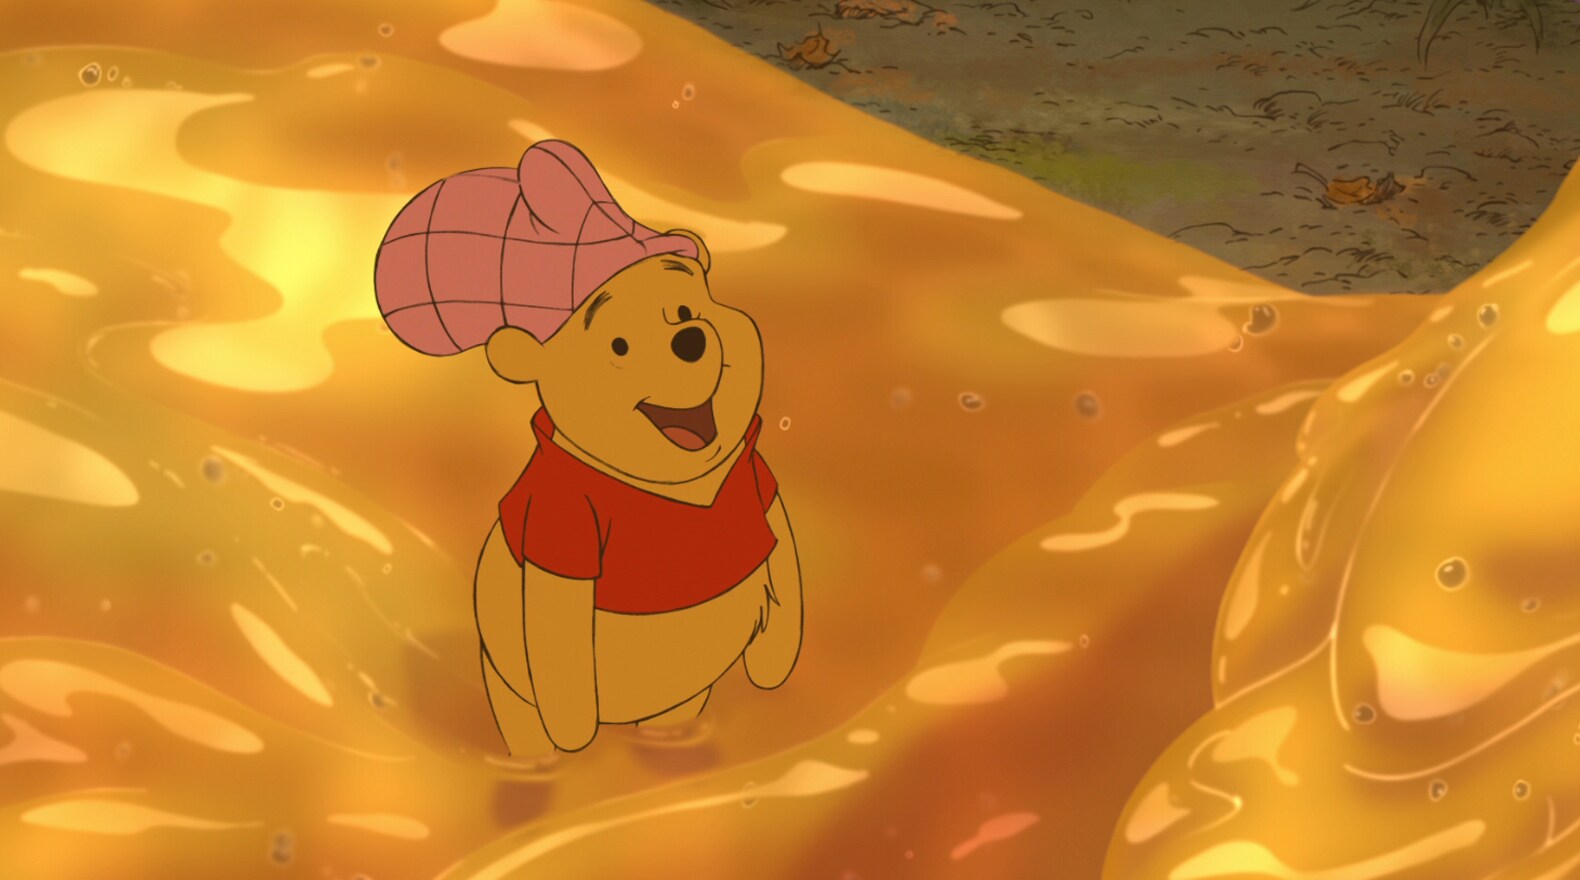 This is what happy Pooh Bear looks like.